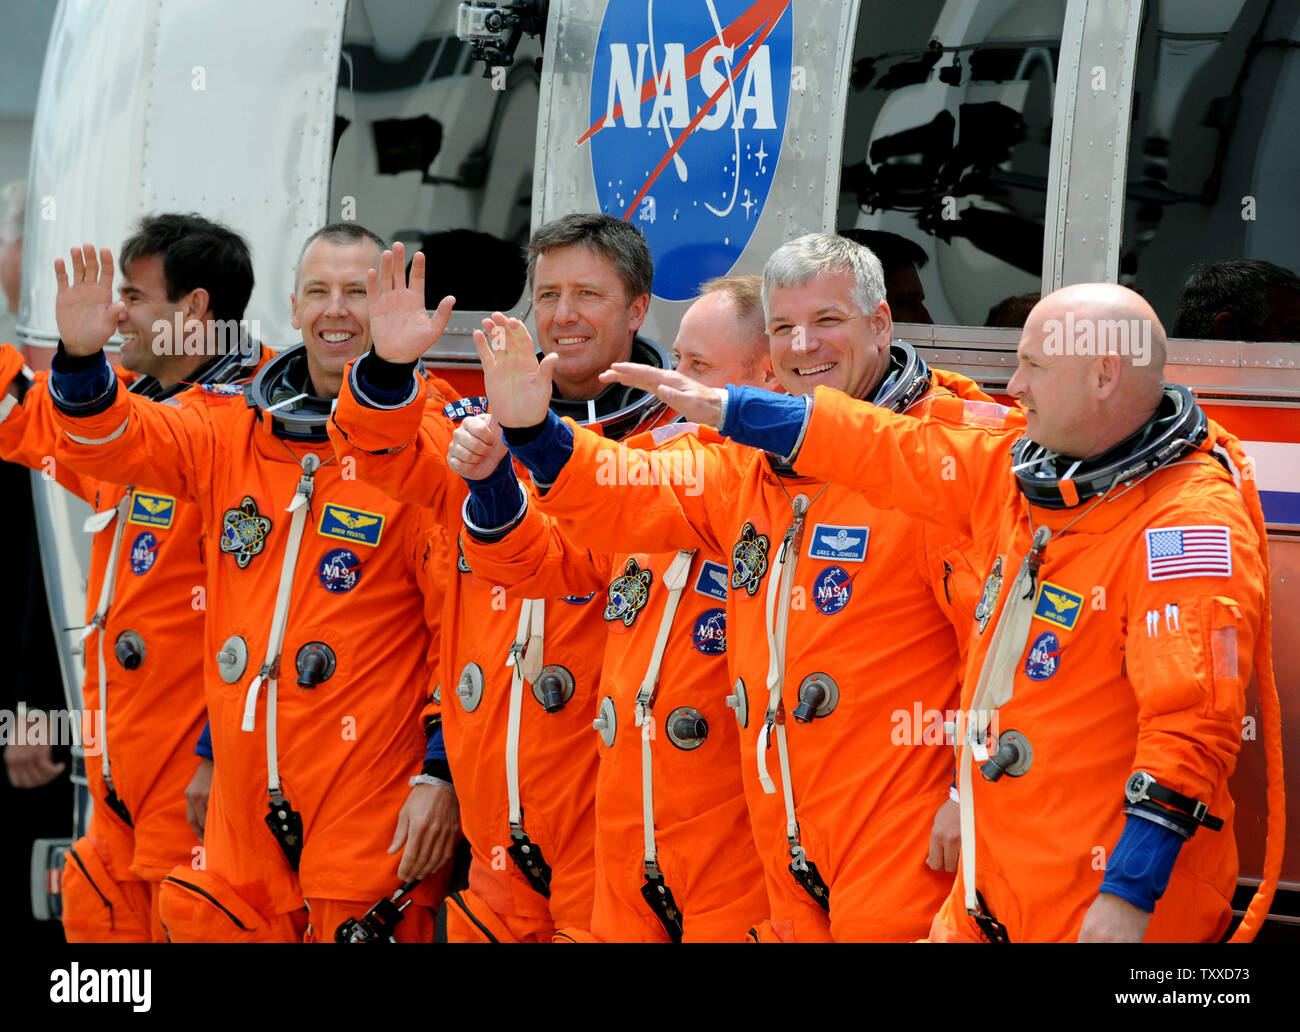 Space Shuttle Endeavour Commander Mark Kelly (right) waves after departing with his crew and boarding the Astrovan on their way to the launchpad for Endeavour's last flight at Kennedy Space Center on April 29, 2011.  The launch attempt was scrubbed minutes later. Behind Kelly is Pilot Greg Johnston and mission specialists  Mike Finke and Roberto Vittori, Drew Feustel, and Greg Chamitoff (left).  Kelly is the husband of Arizona Congresswoman Gabrielle Giffords, who was recovering from an assassination attempt and at the Cape to watch the possible liftoff.   UPI/ Pat Benic Stock Photo